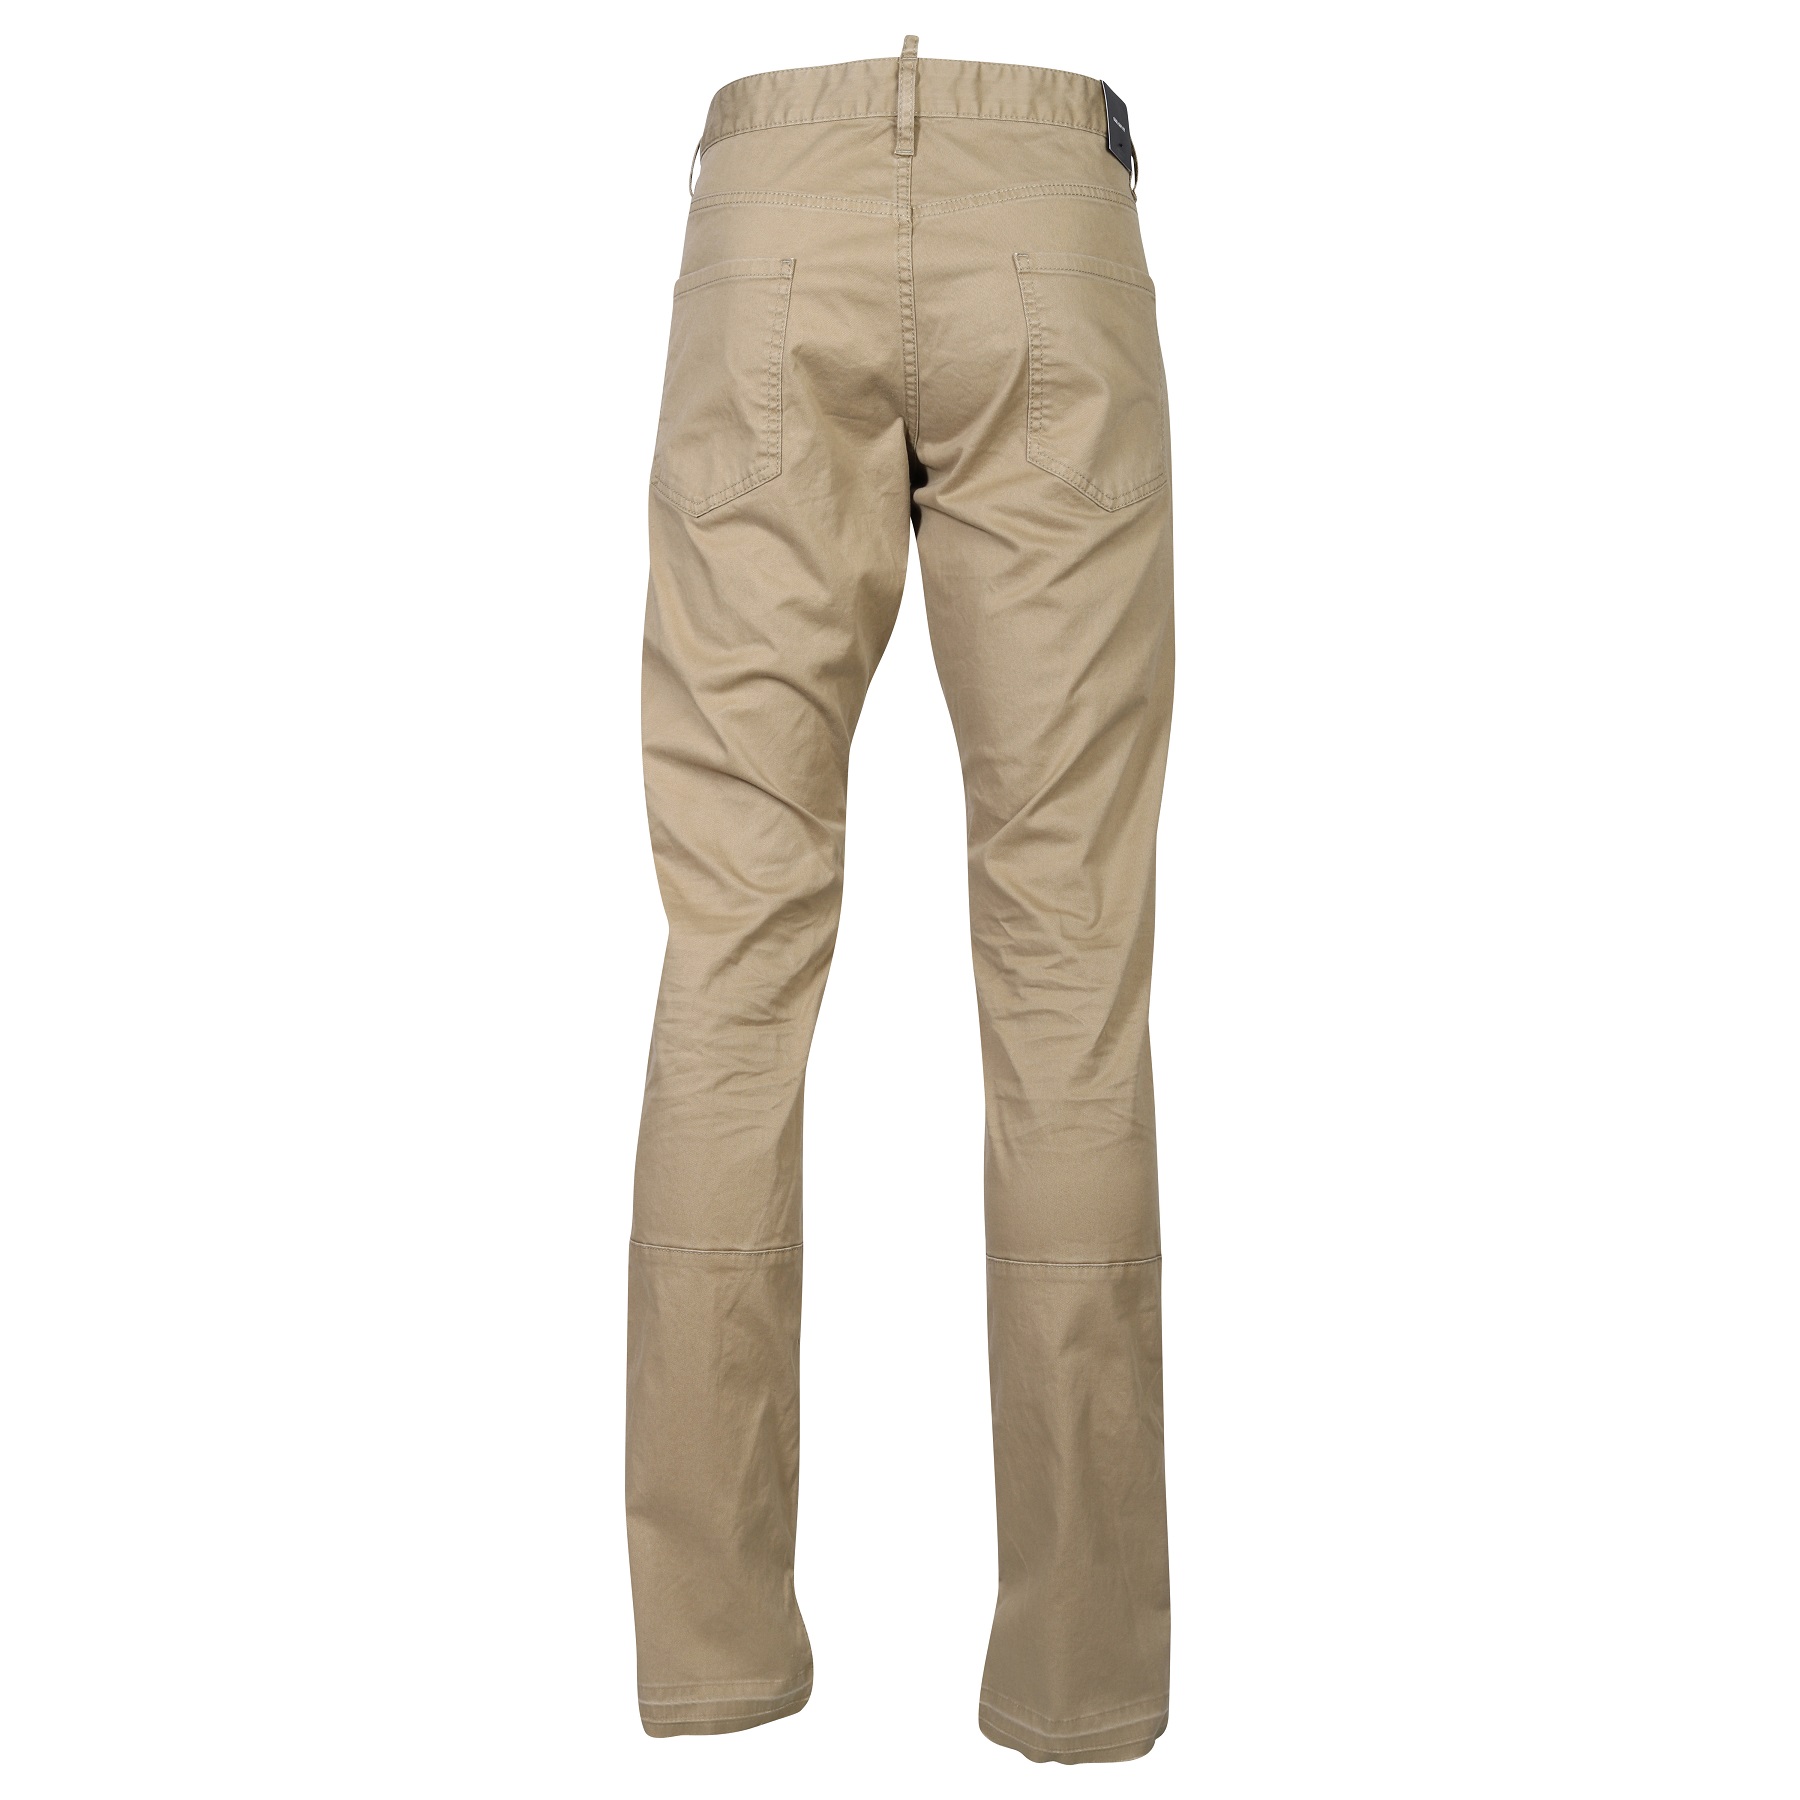 DSQUARED2 Cool Guy Fit Pant in Beige